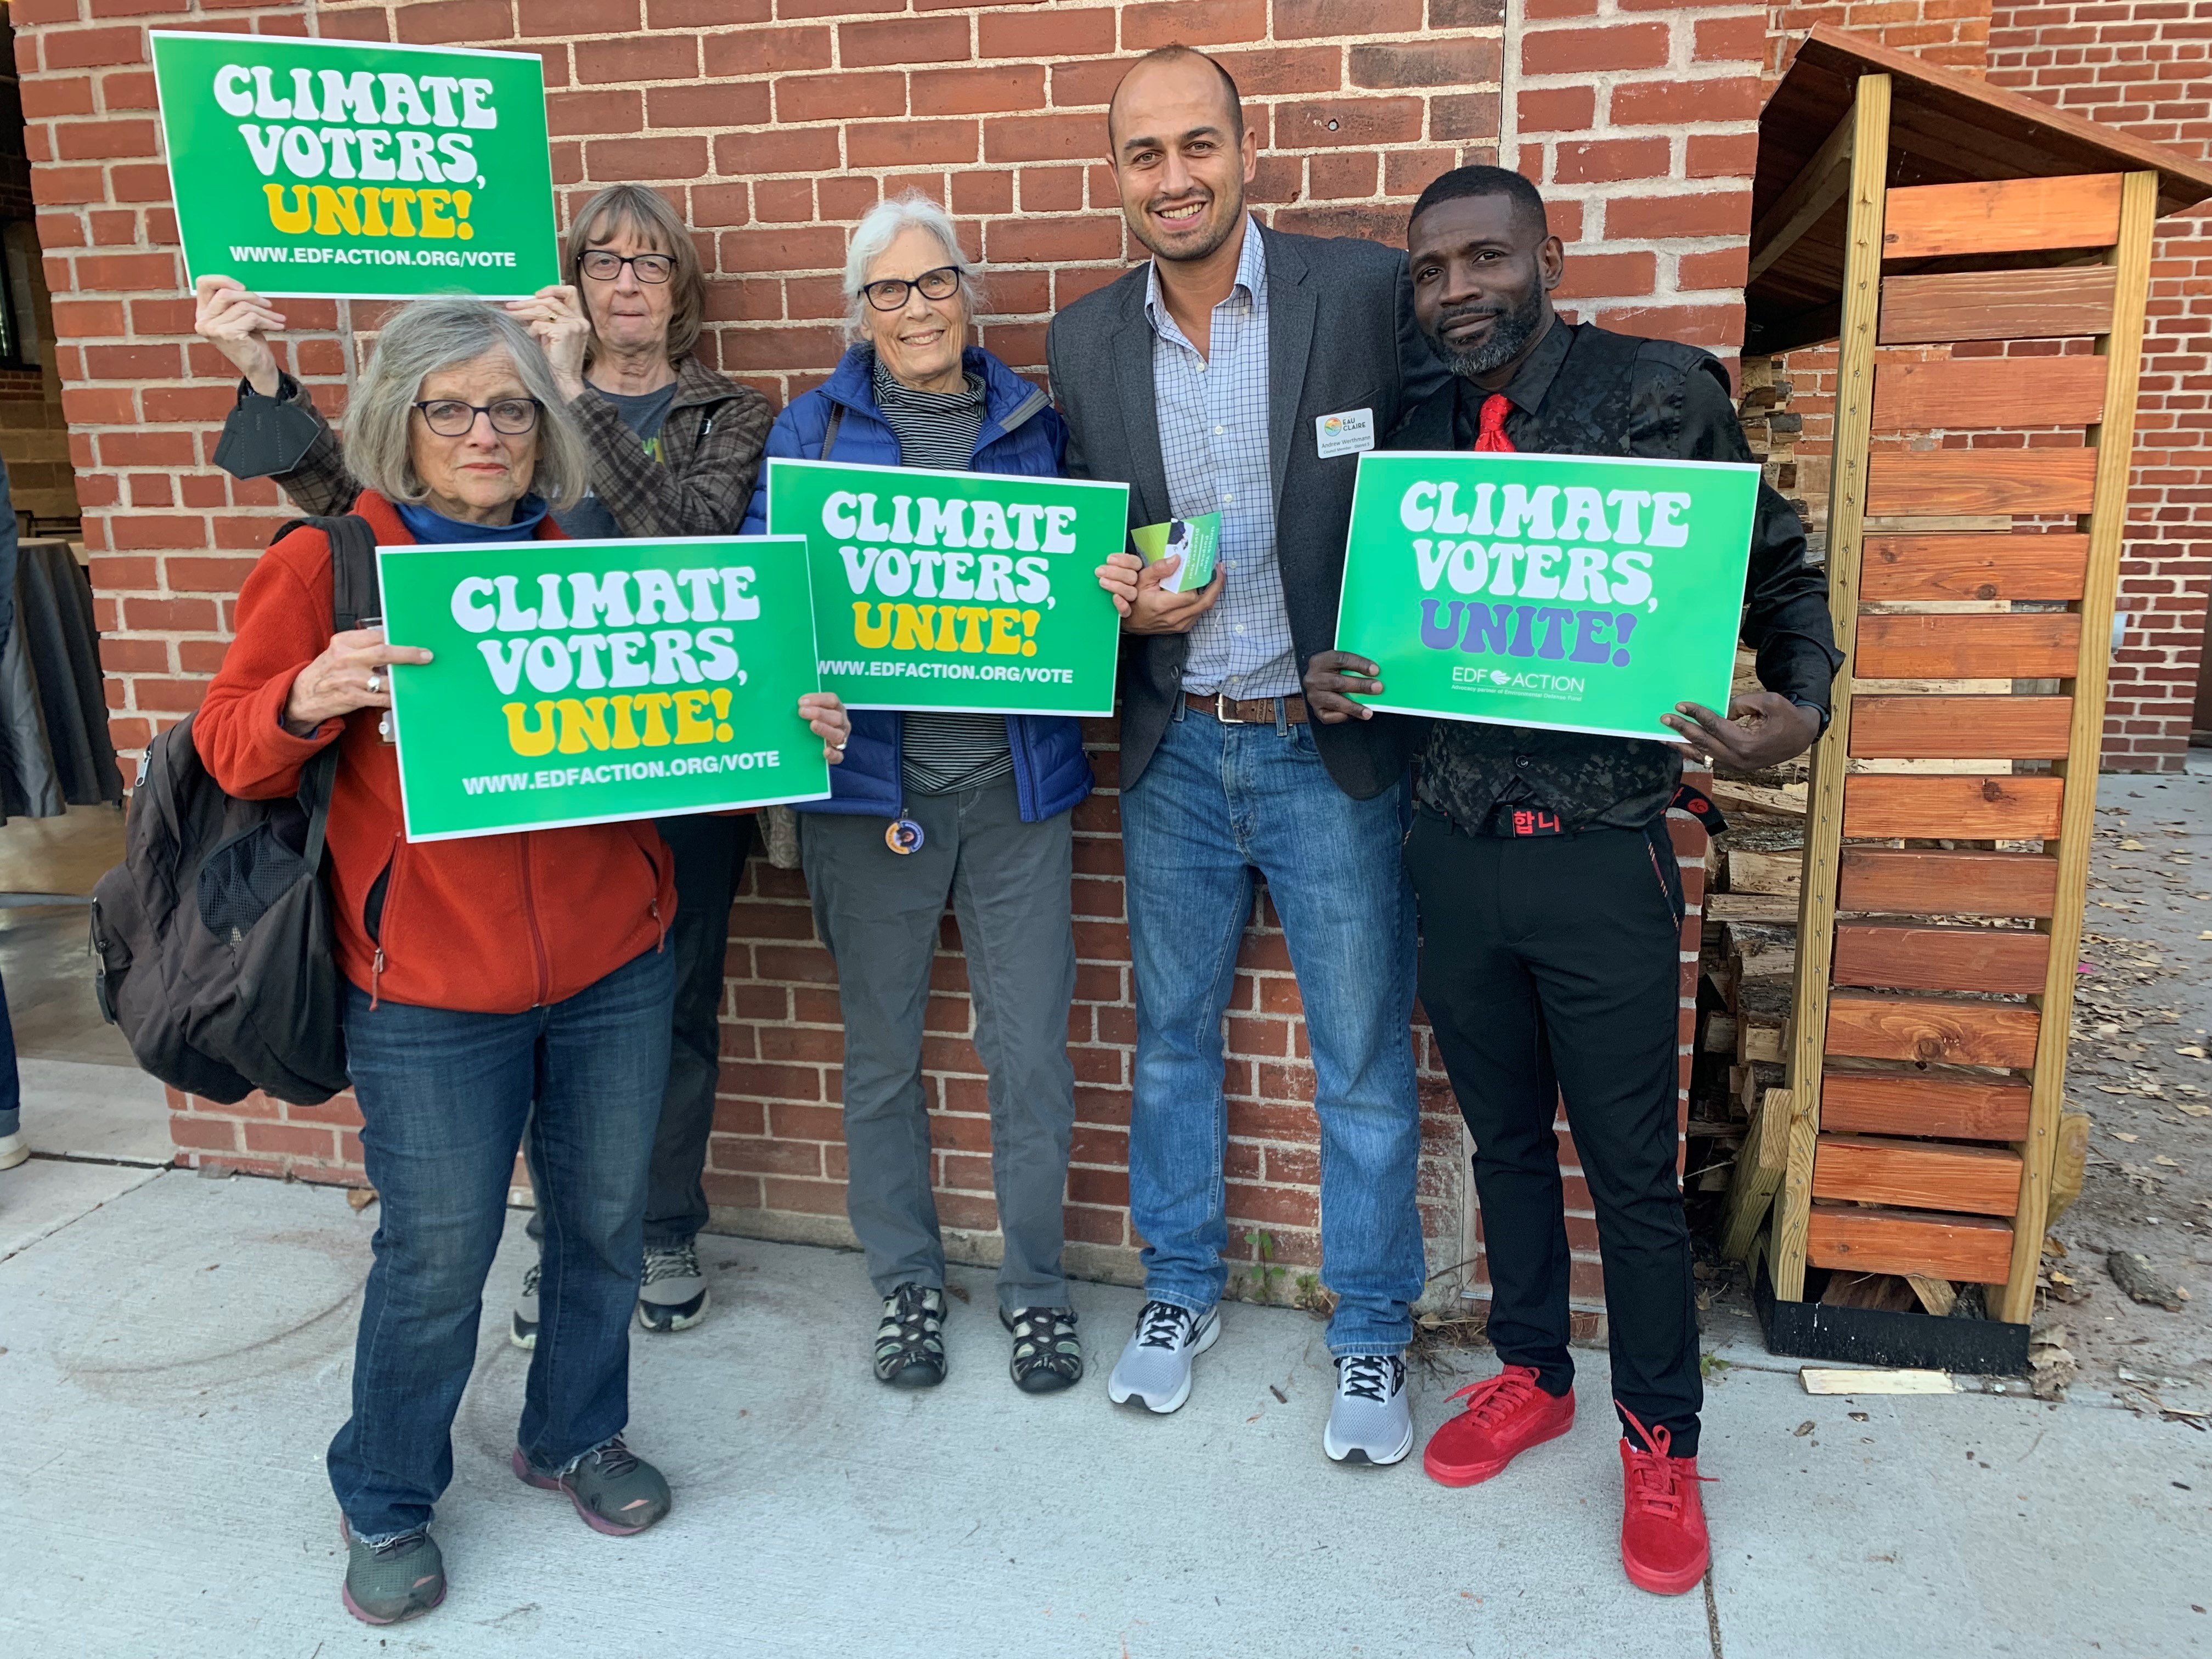 Five People Hold "Climate Voters, Unite!" Signs